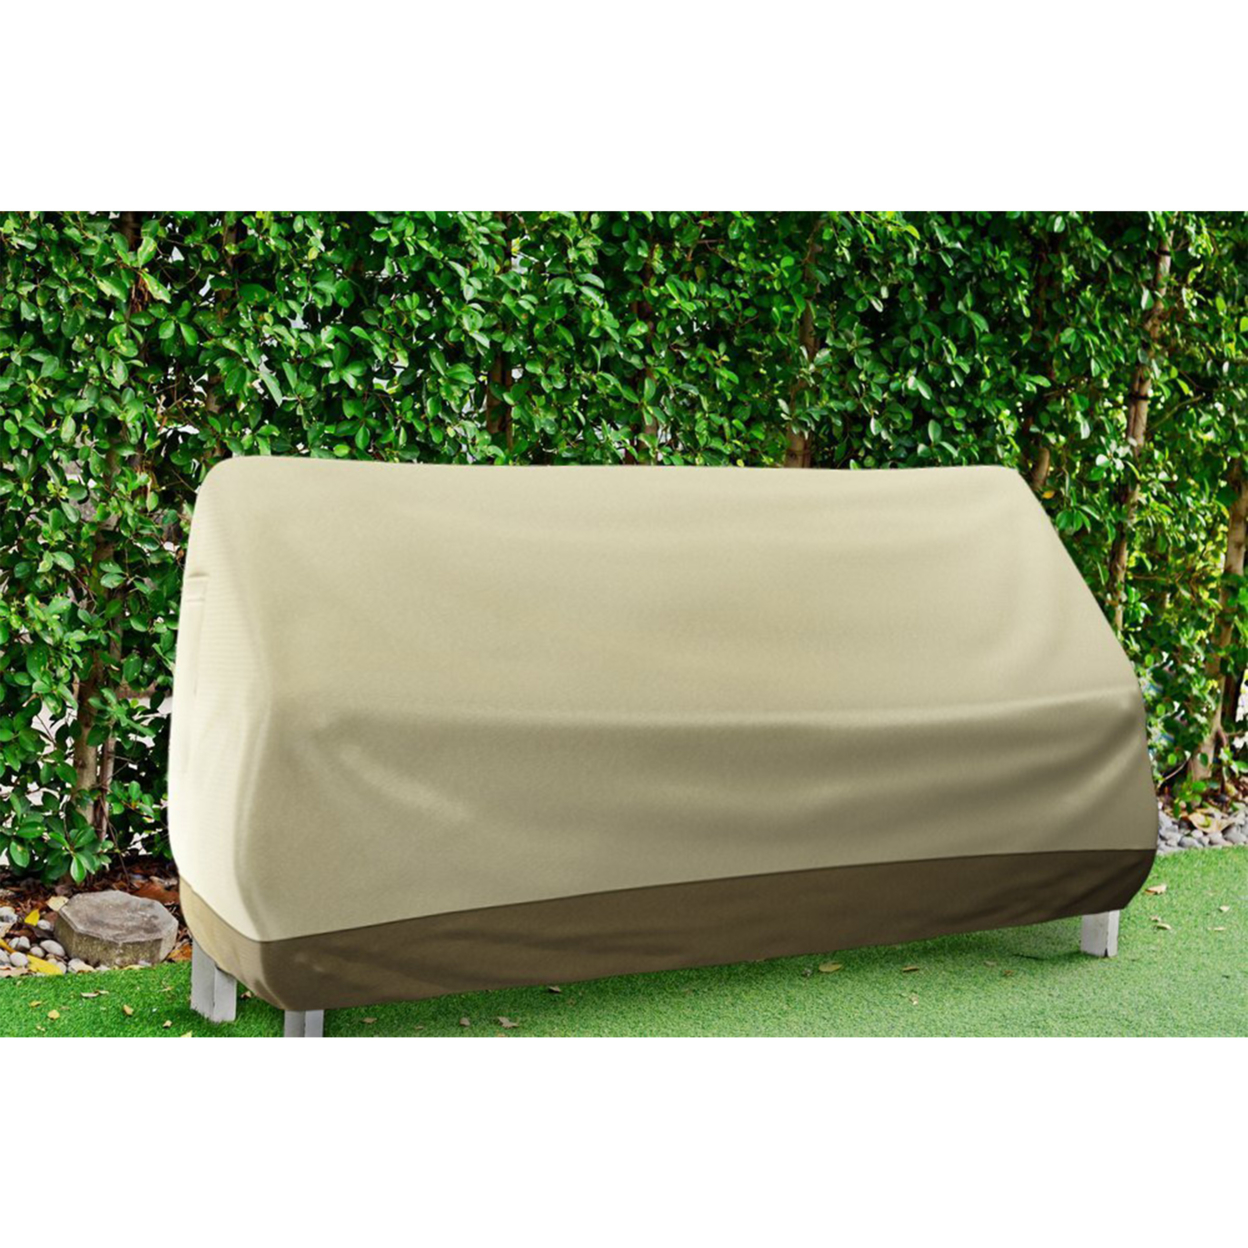 Outdoor Cover For Loveseat, Sofa, Bench- 58 Inch Heavy Duty Water Resistant Patio Furniture Protective Cover With Vent